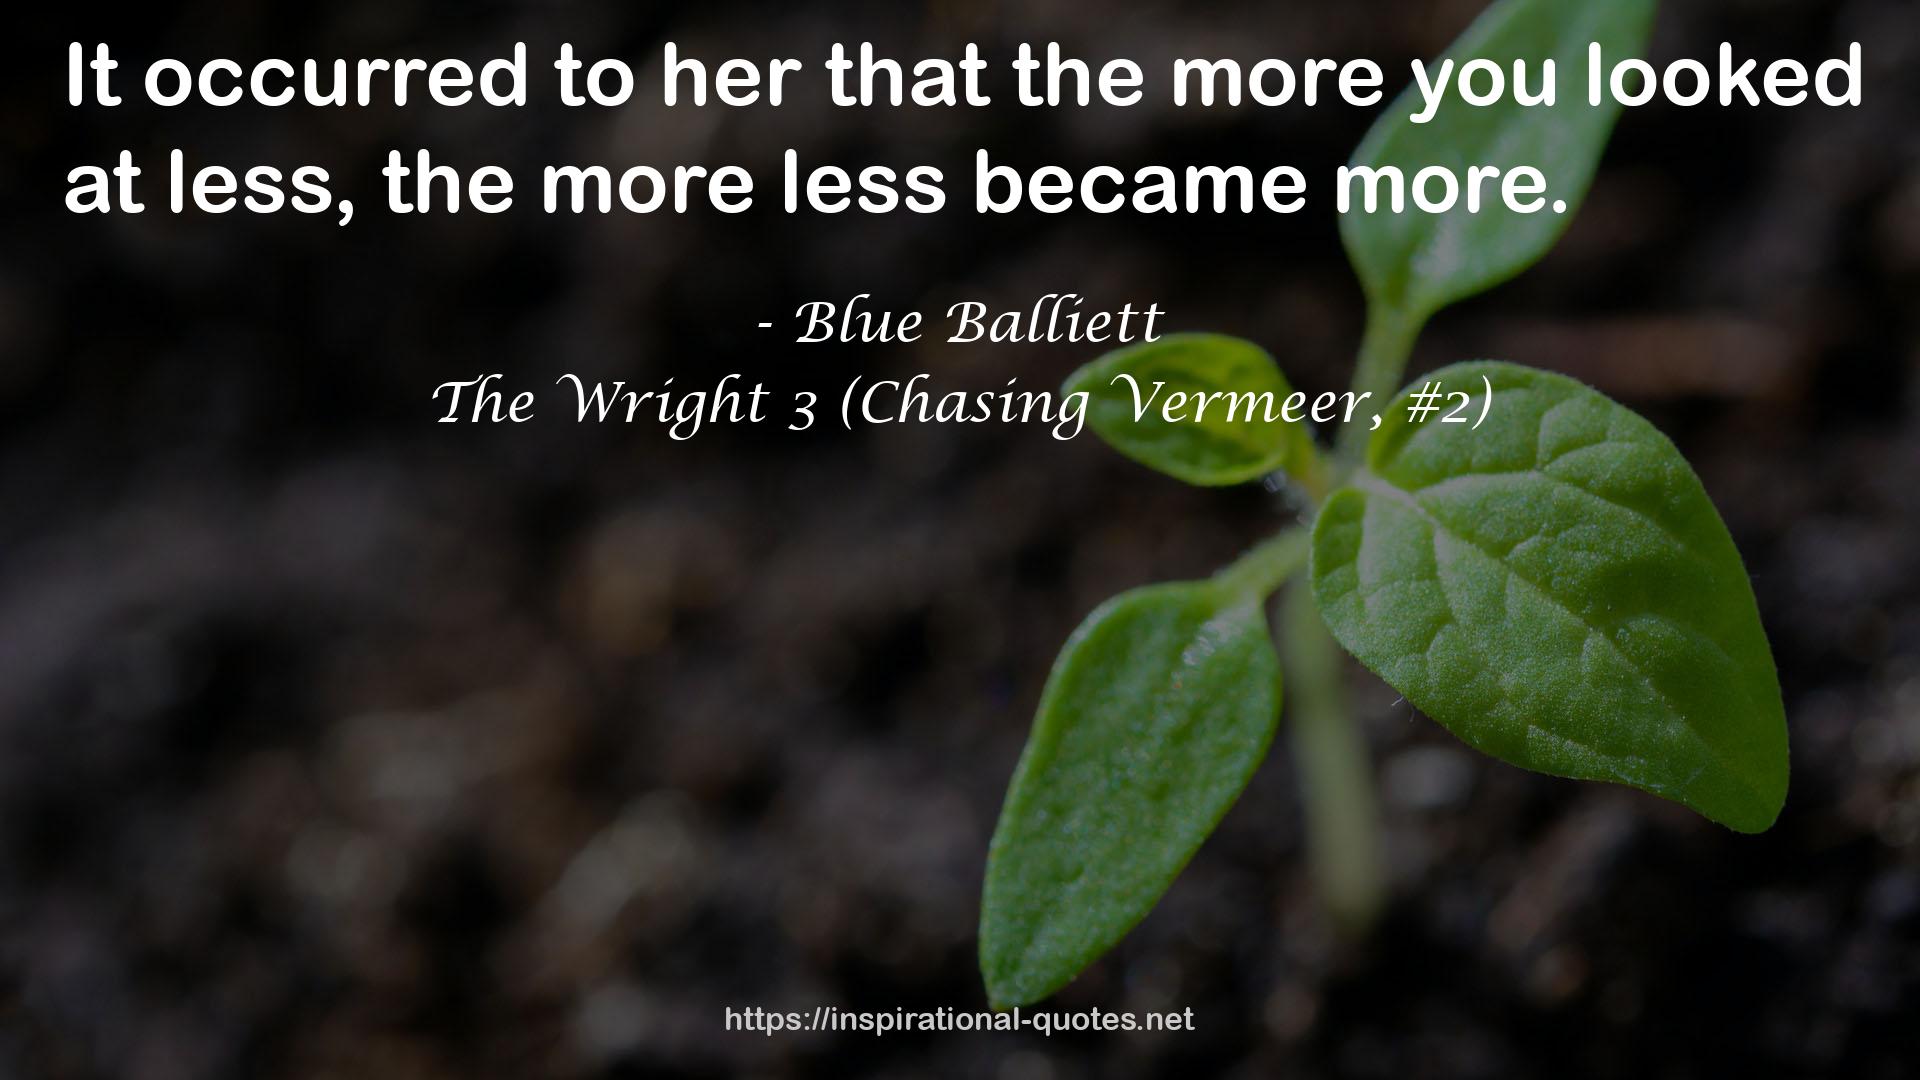 The Wright 3 (Chasing Vermeer, #2) QUOTES